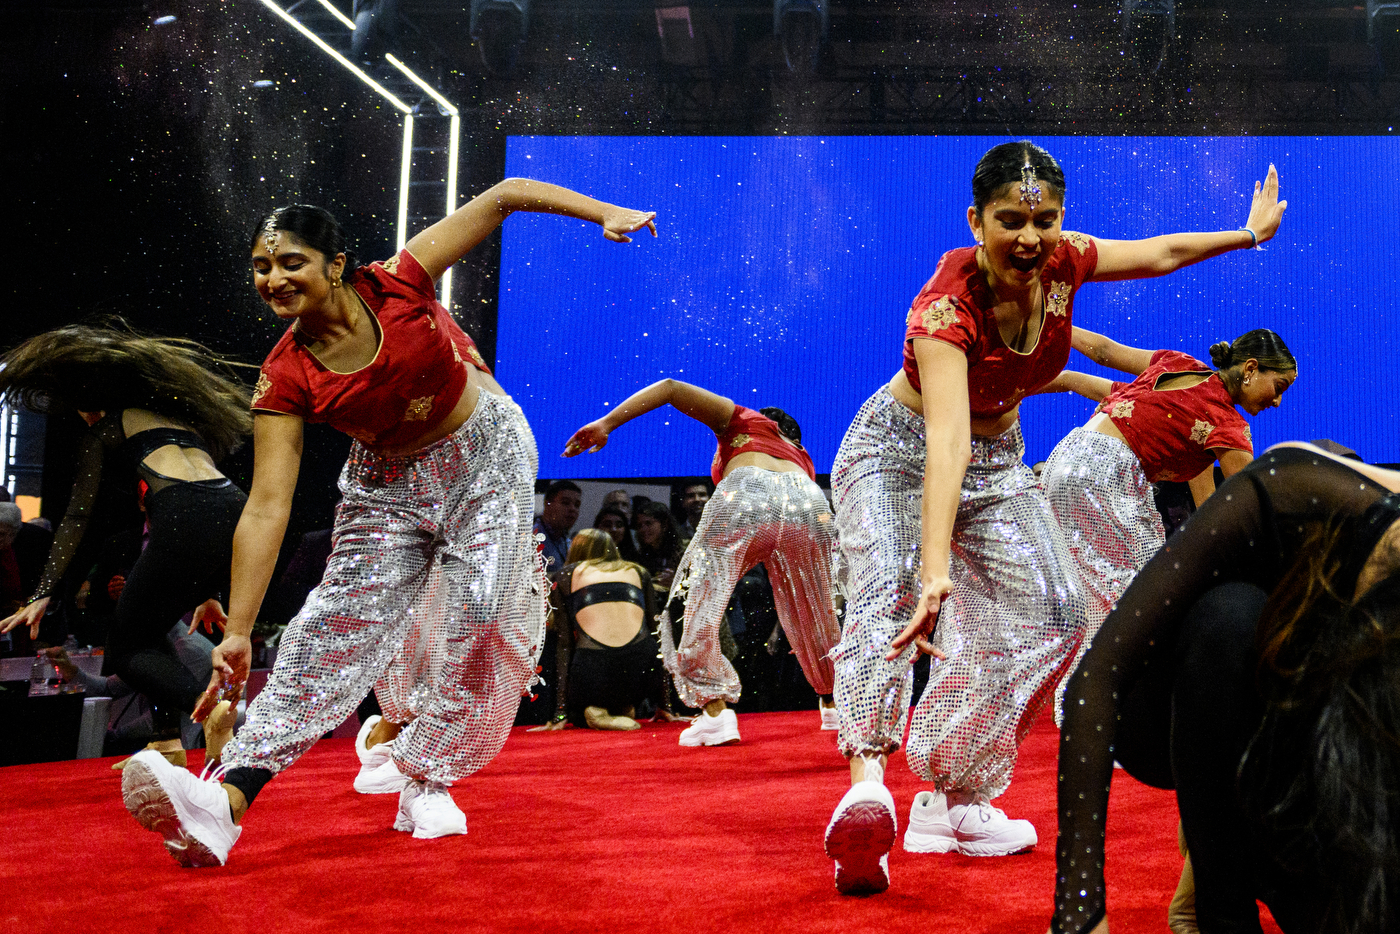 Dancers perform on stage